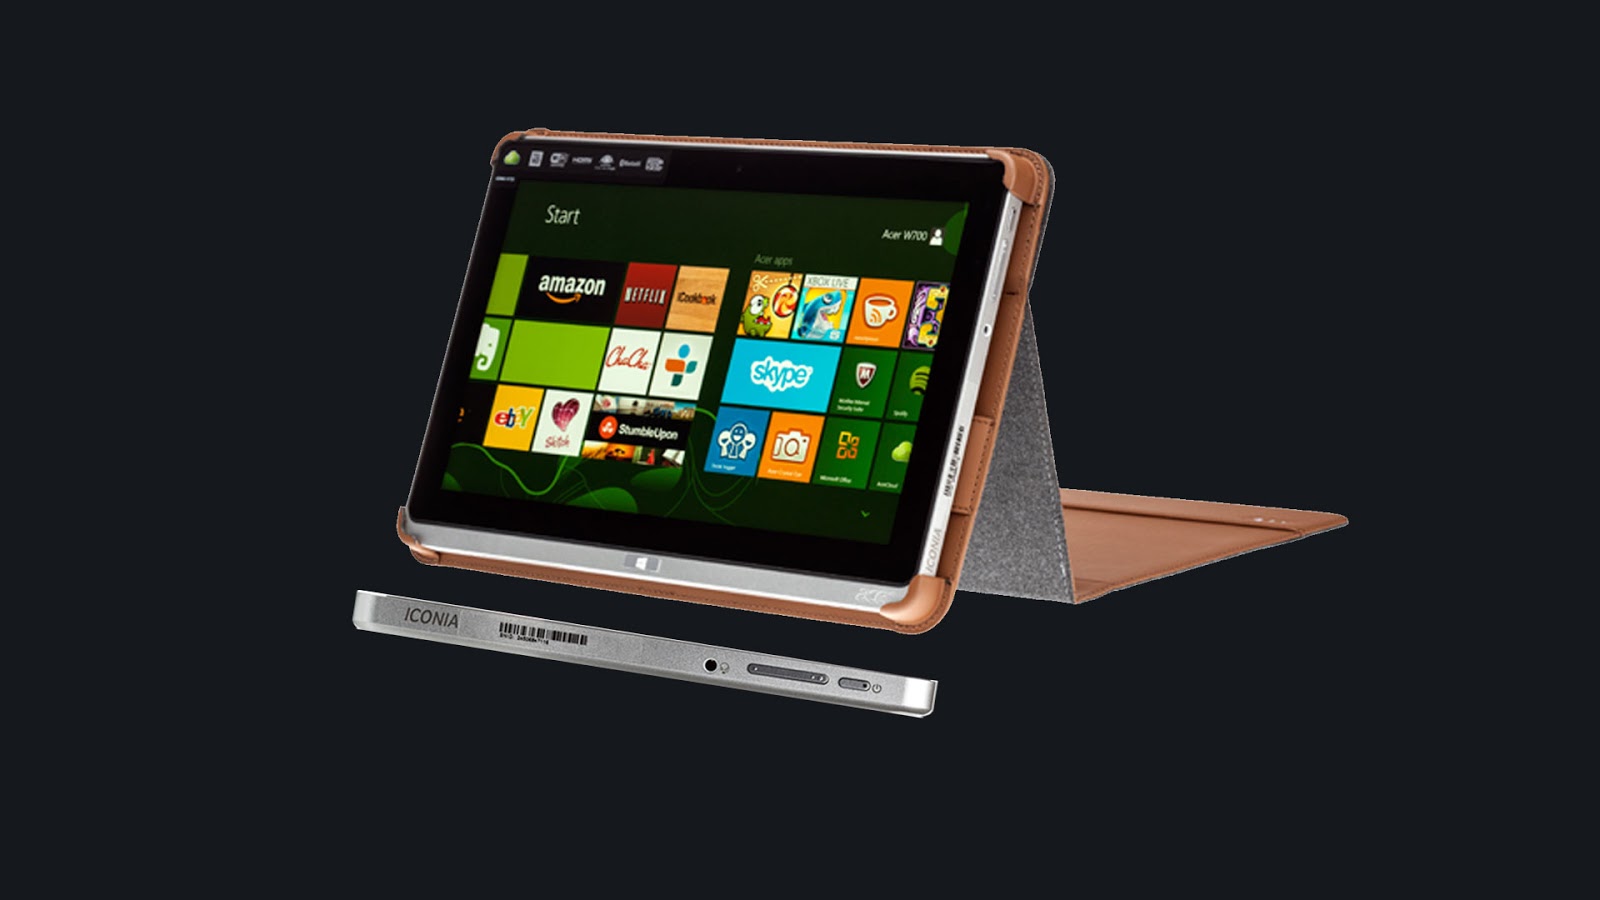 Acer Iconia W7 Tablet PC Review | Tablet-Laptop Magazine Reviews & Specifications1600 x 900